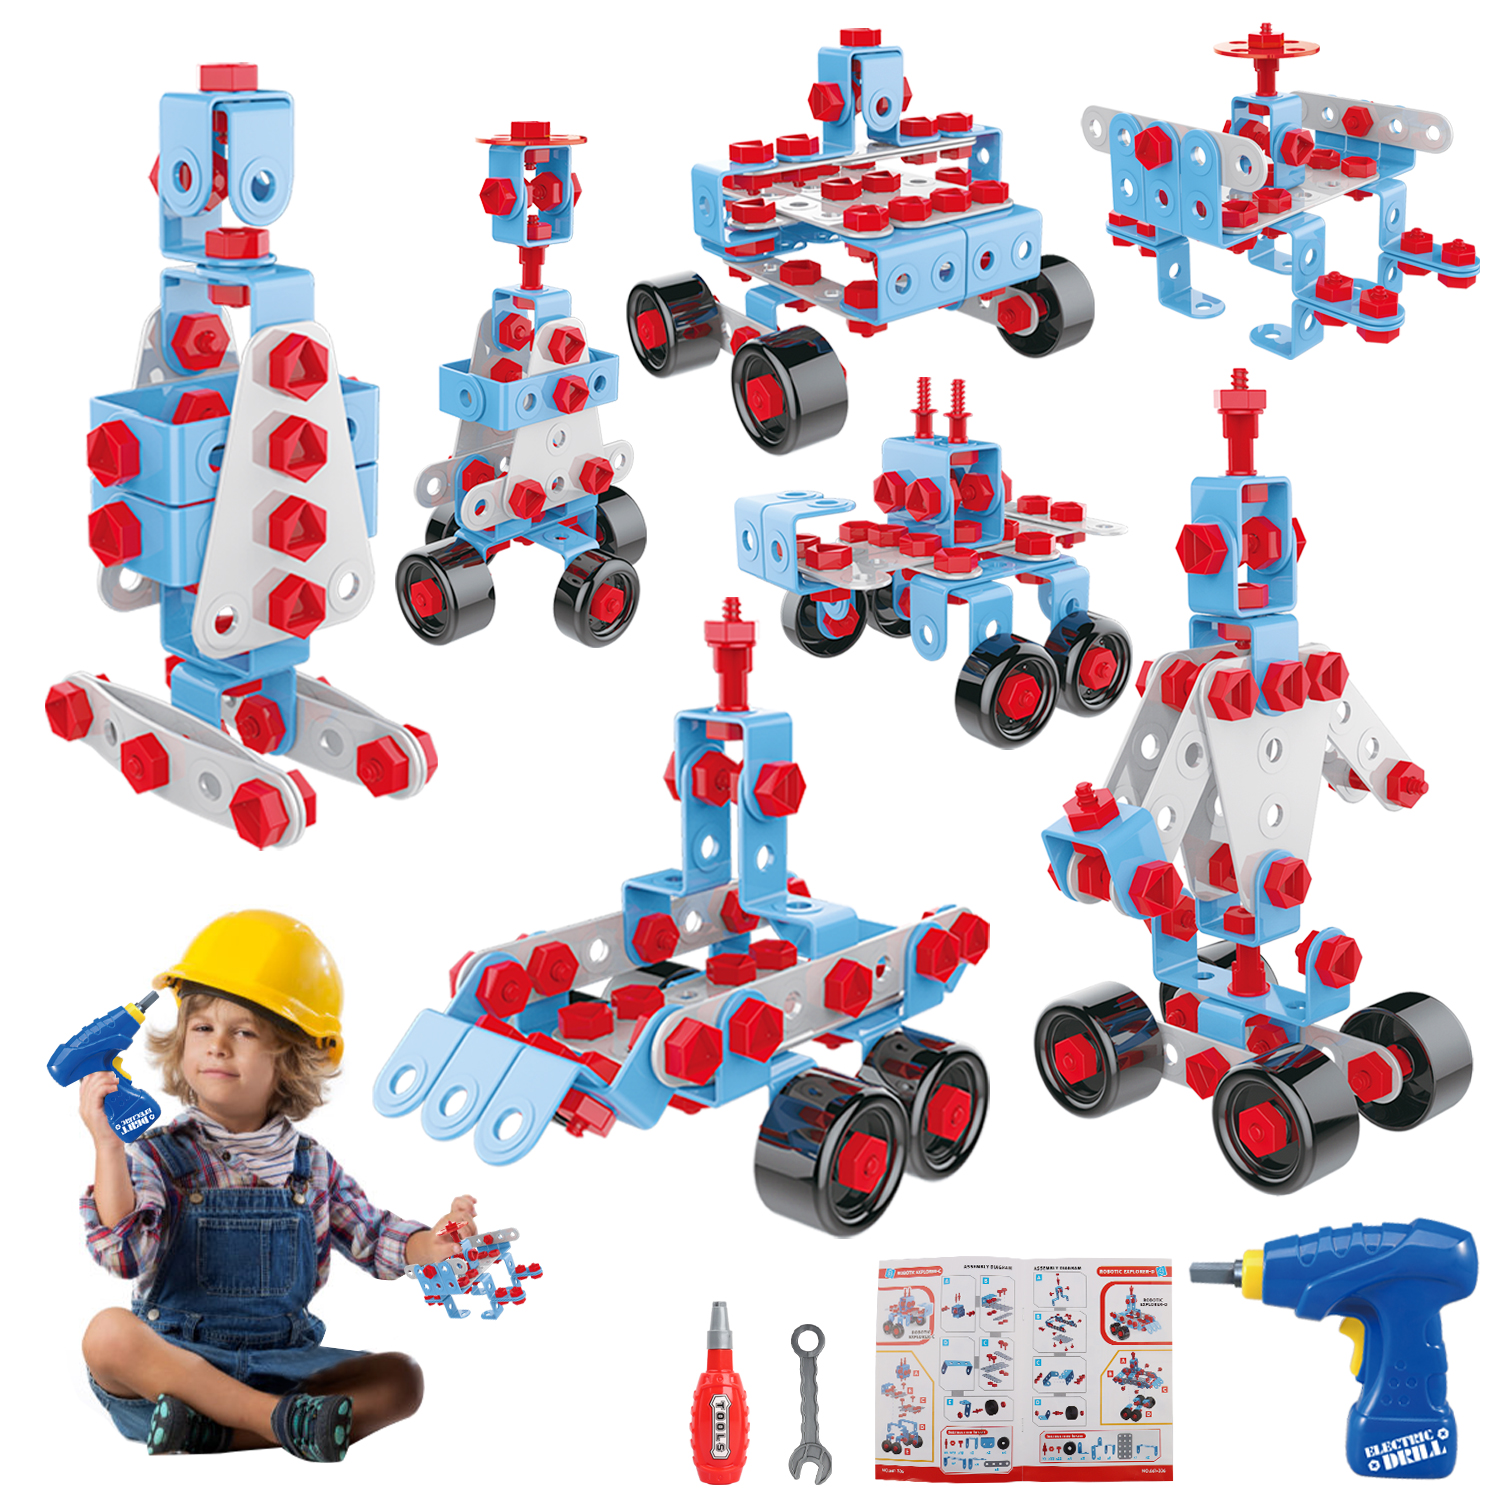 HONYAT 247pcs 7-in-1 STEM Toys Robot Building Kit, Electric Drill Puzzle Building Set with Storage Box, Educational Construction Building Blocks Set - Gift for Preschool Kids, Boys and Girls Age 5-12